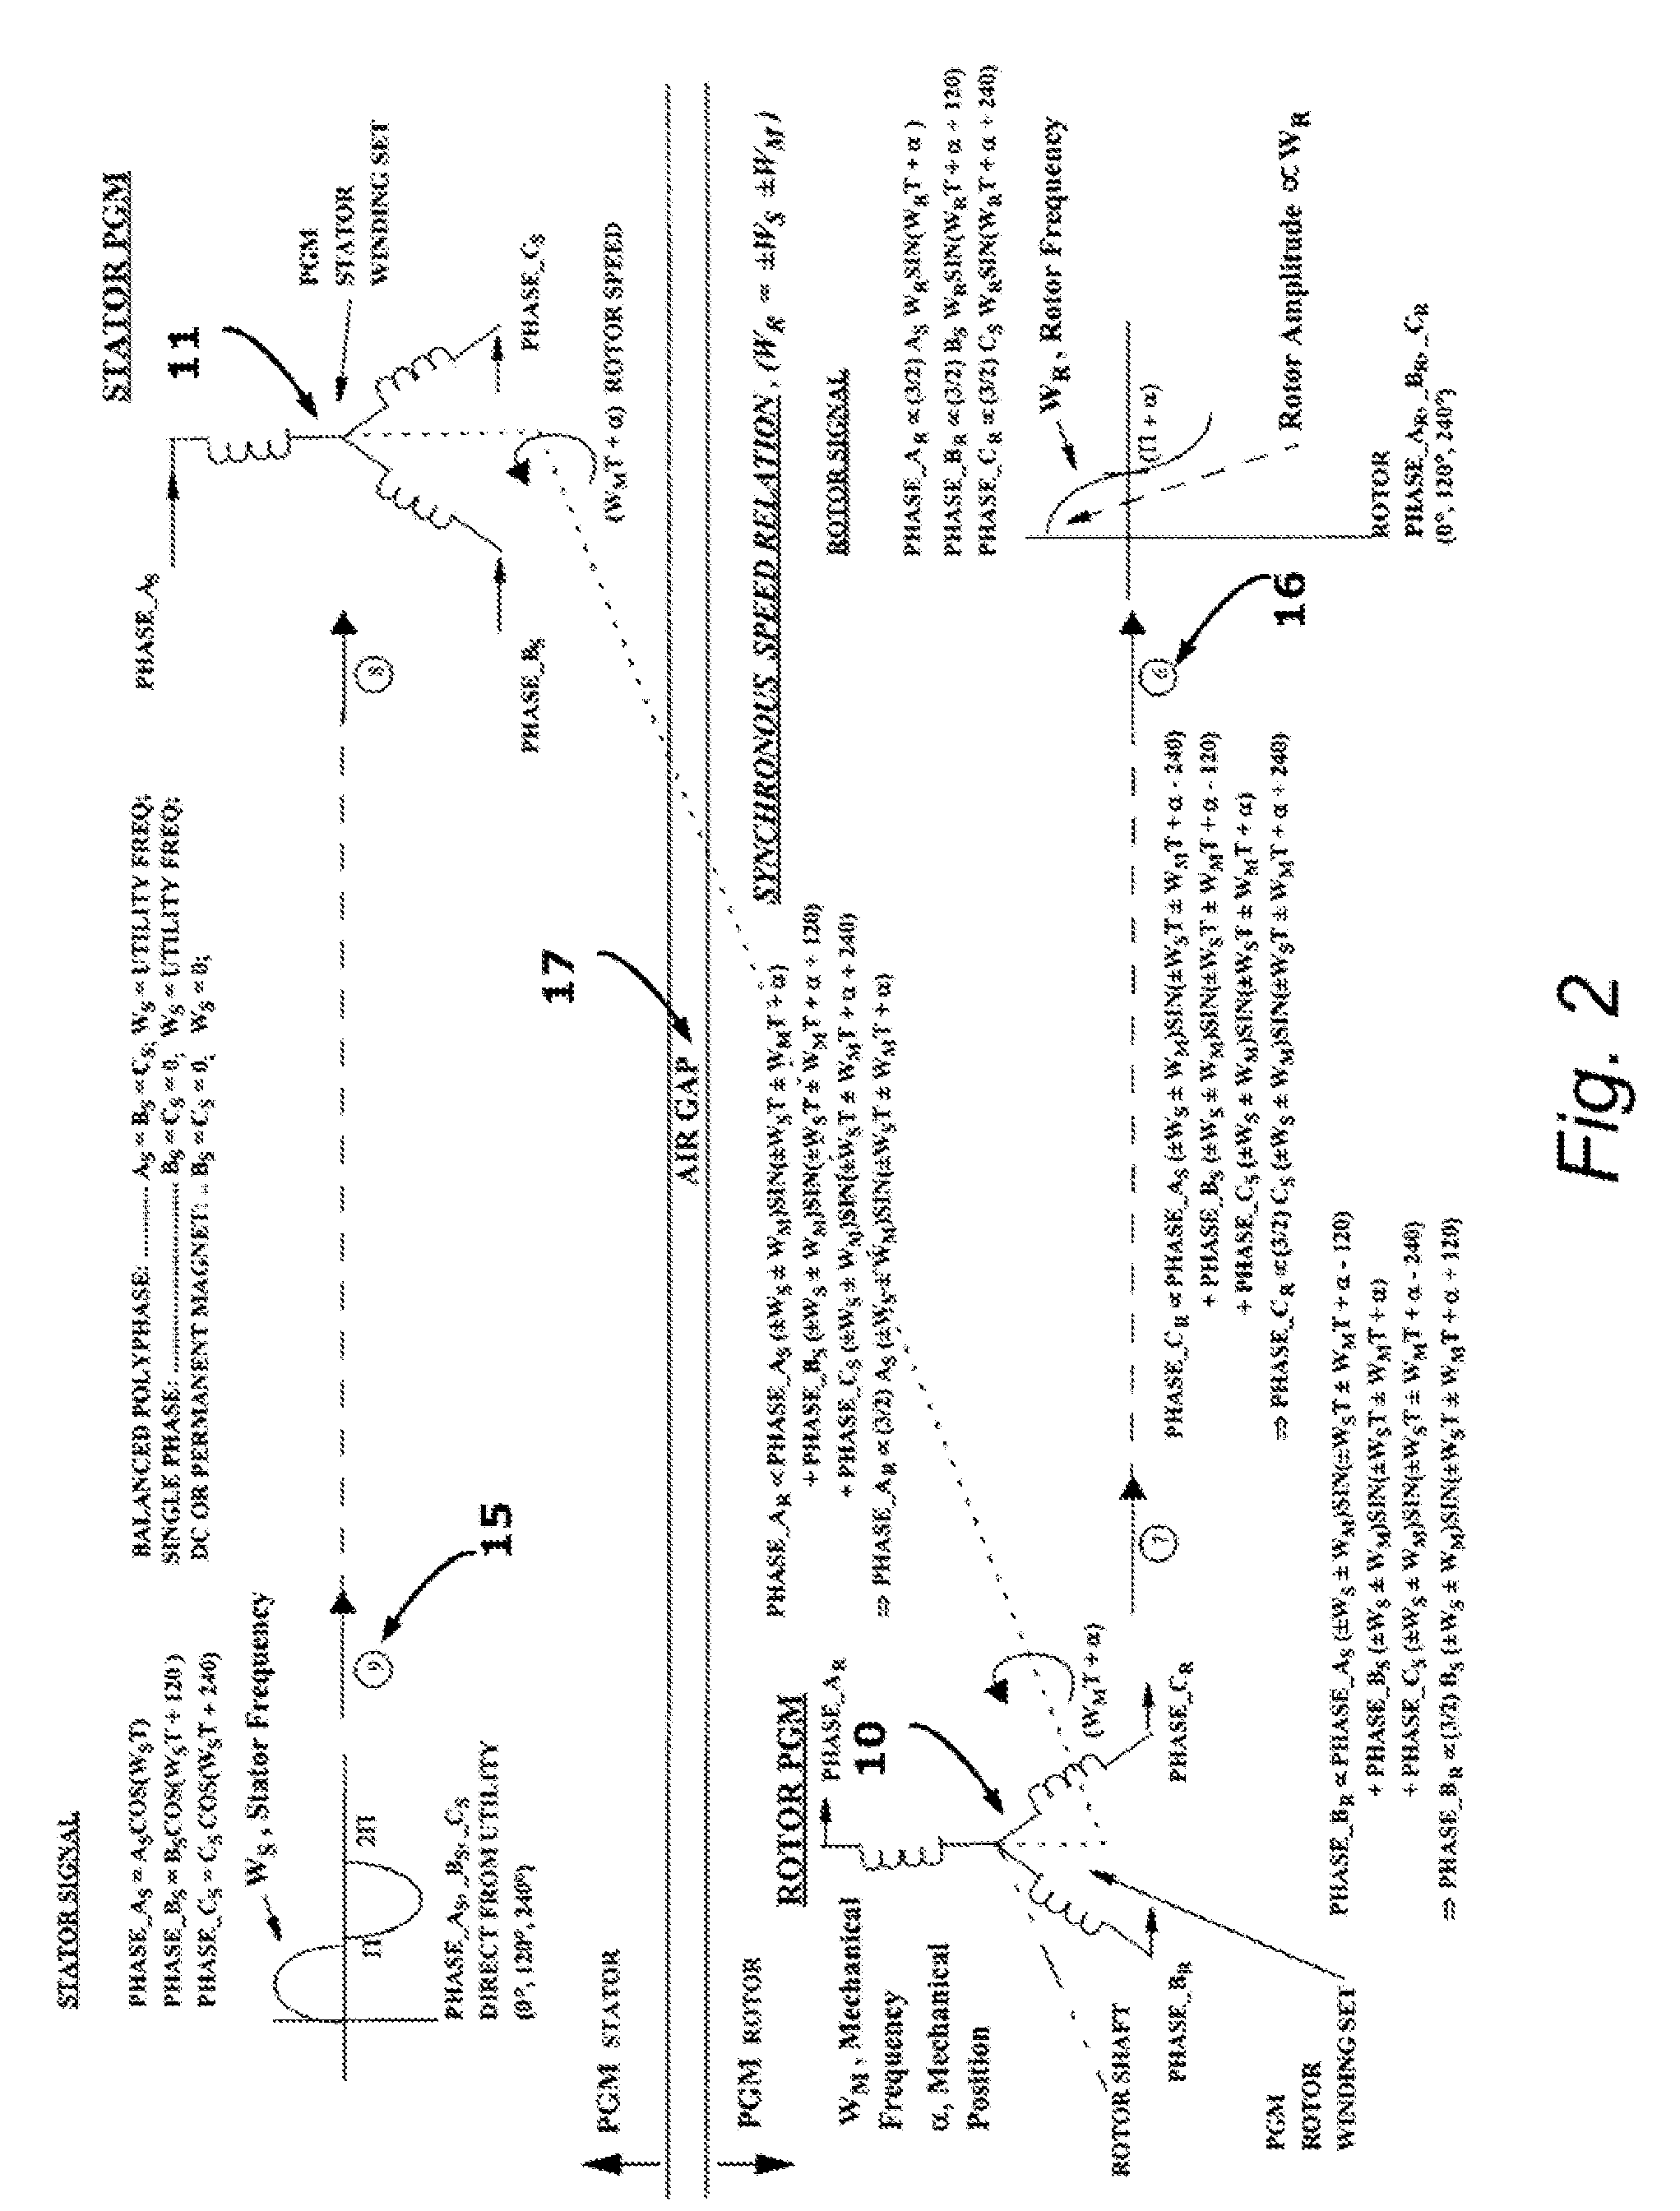 Brushless Multiphase Self-Commutation Control (or BMSCC) and Related Inventions